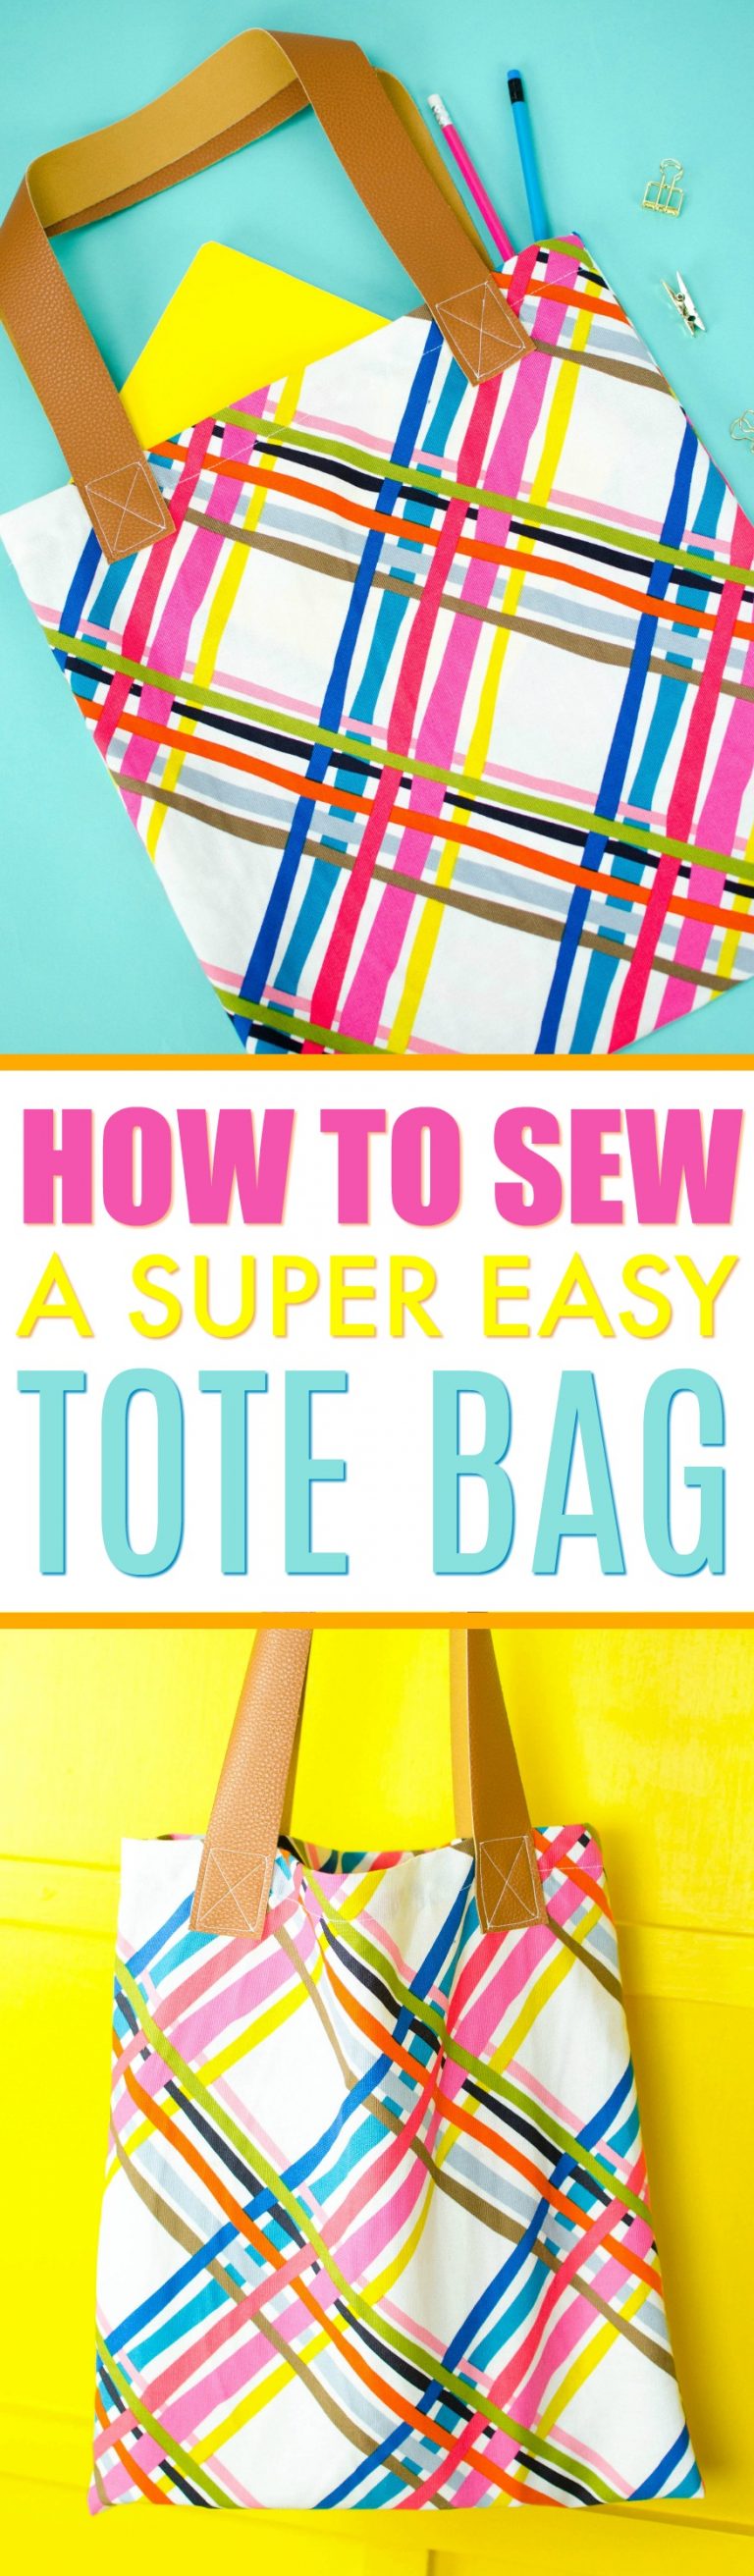 DIY Tote Bag Pattern- How to sew a tote bag